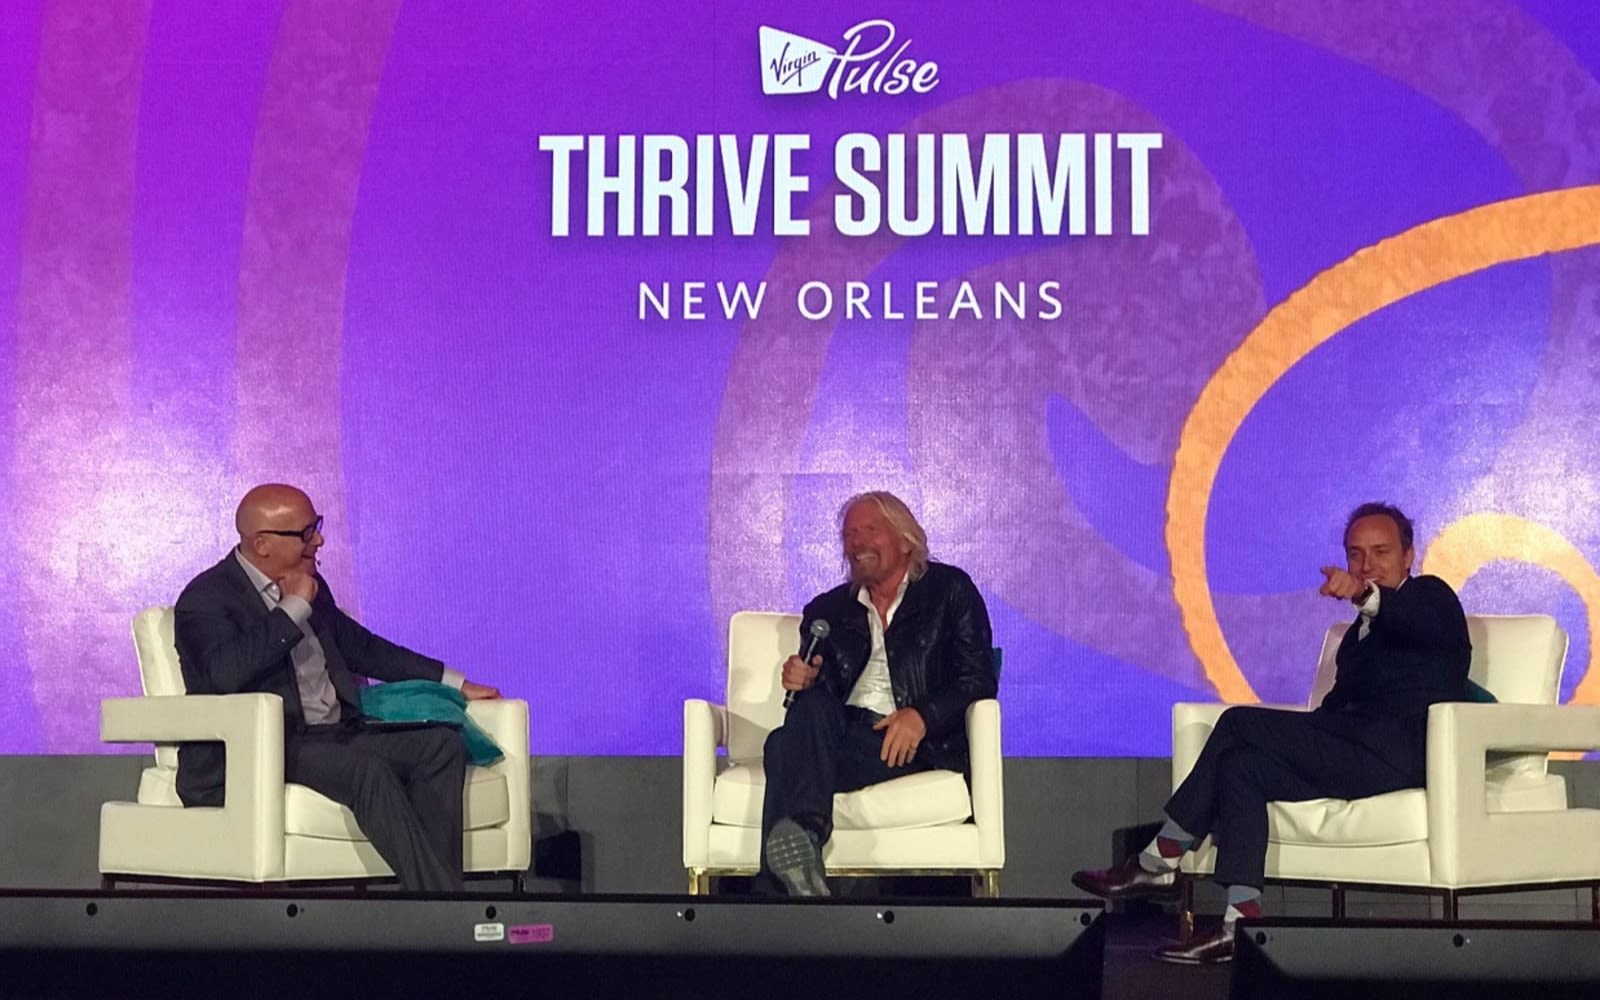 Dave Osborne, Richard Branson and Mark Jeffries on stage at the Virgin Pulse Thrive Summit in New Orleans